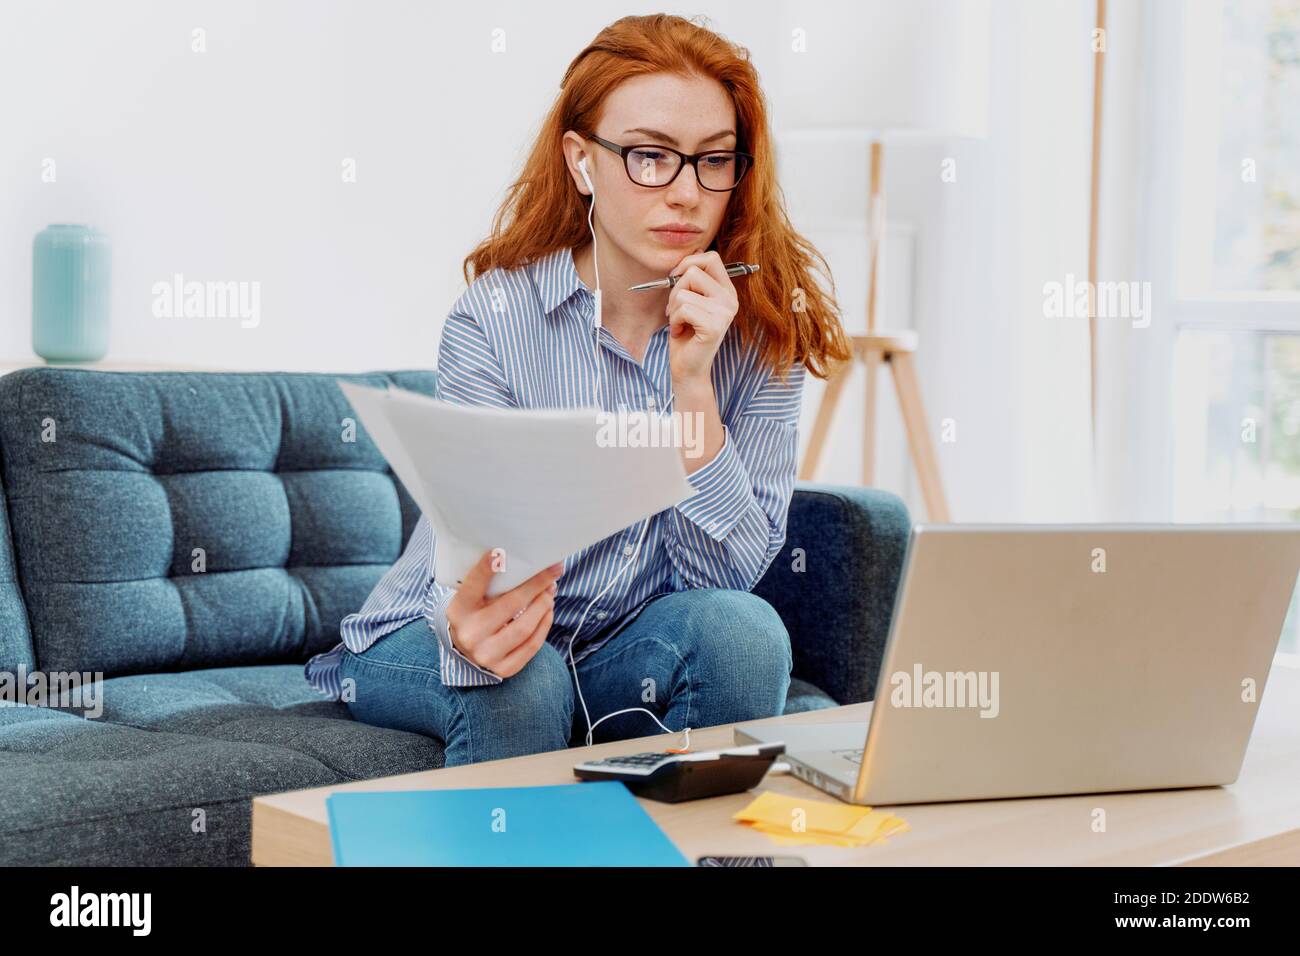 Woman working from home using laptop and internet connection Stock Photo